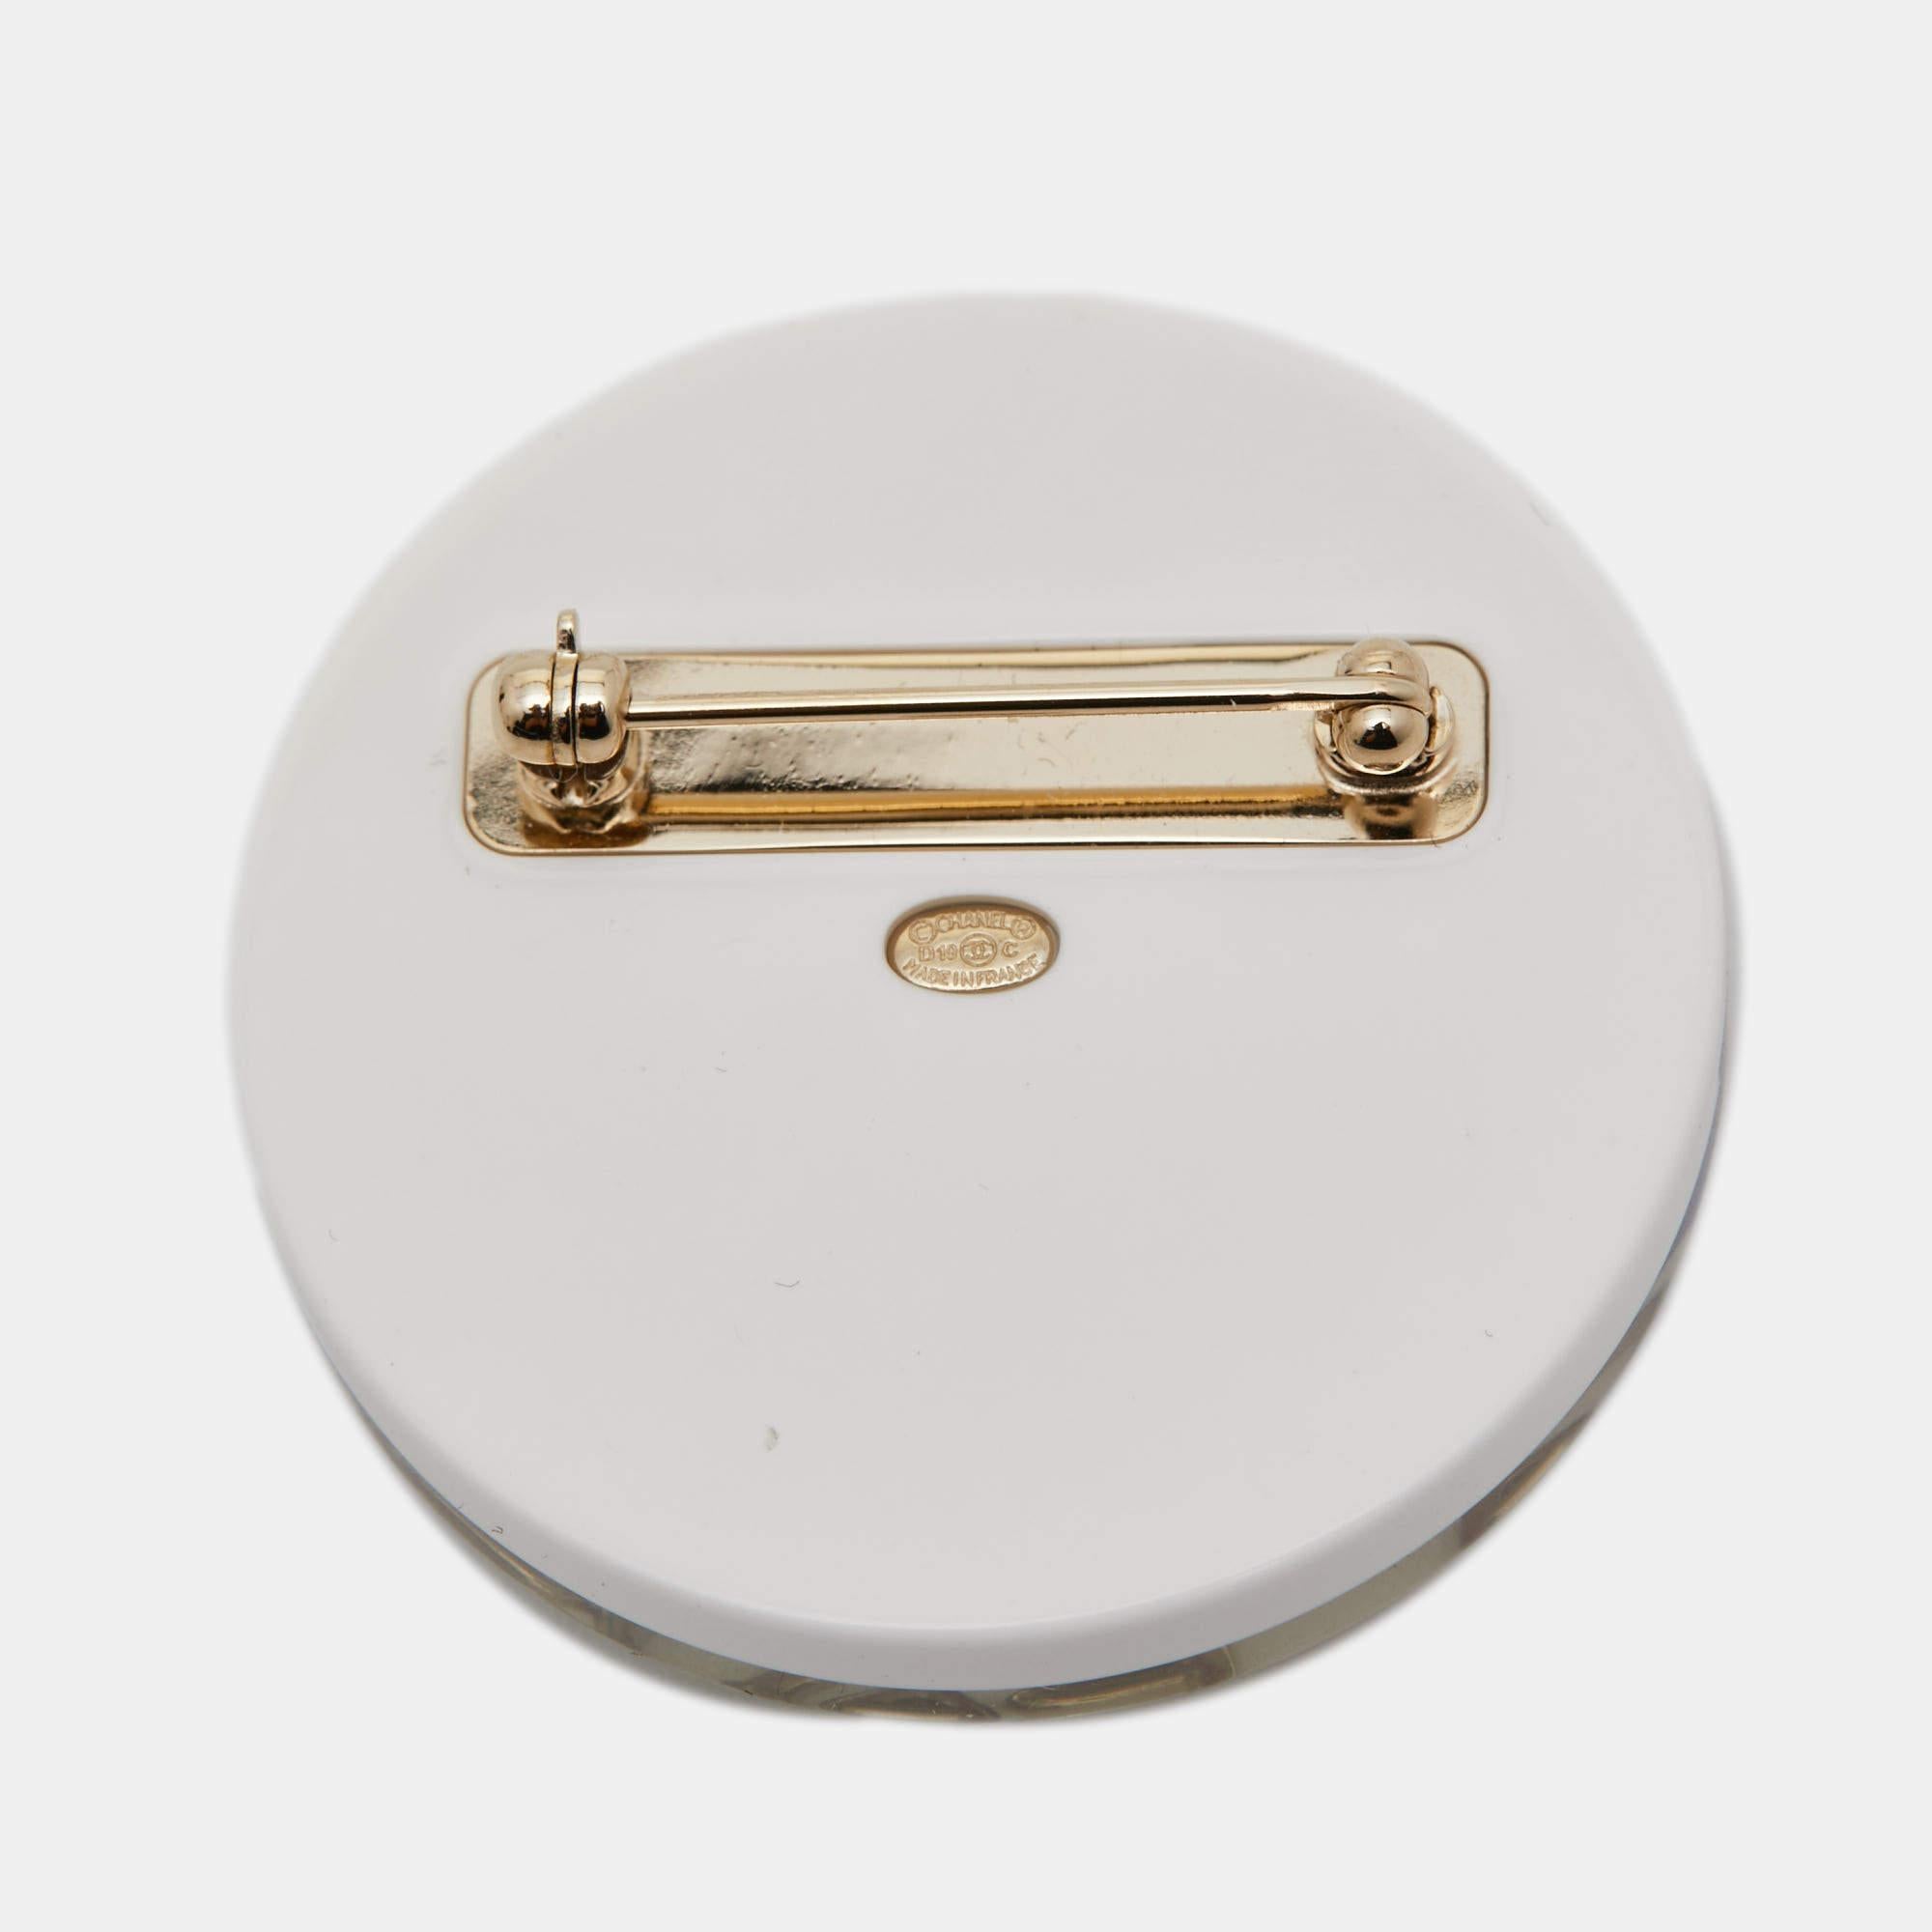 The Chanel brooch is a sophisticated accessory featuring a timeless design. Crafted from high-quality plastic resin, it showcases Chanel's iconic elegance with meticulous detailing. The brooch seamlessly blends luxury and style, making it a coveted